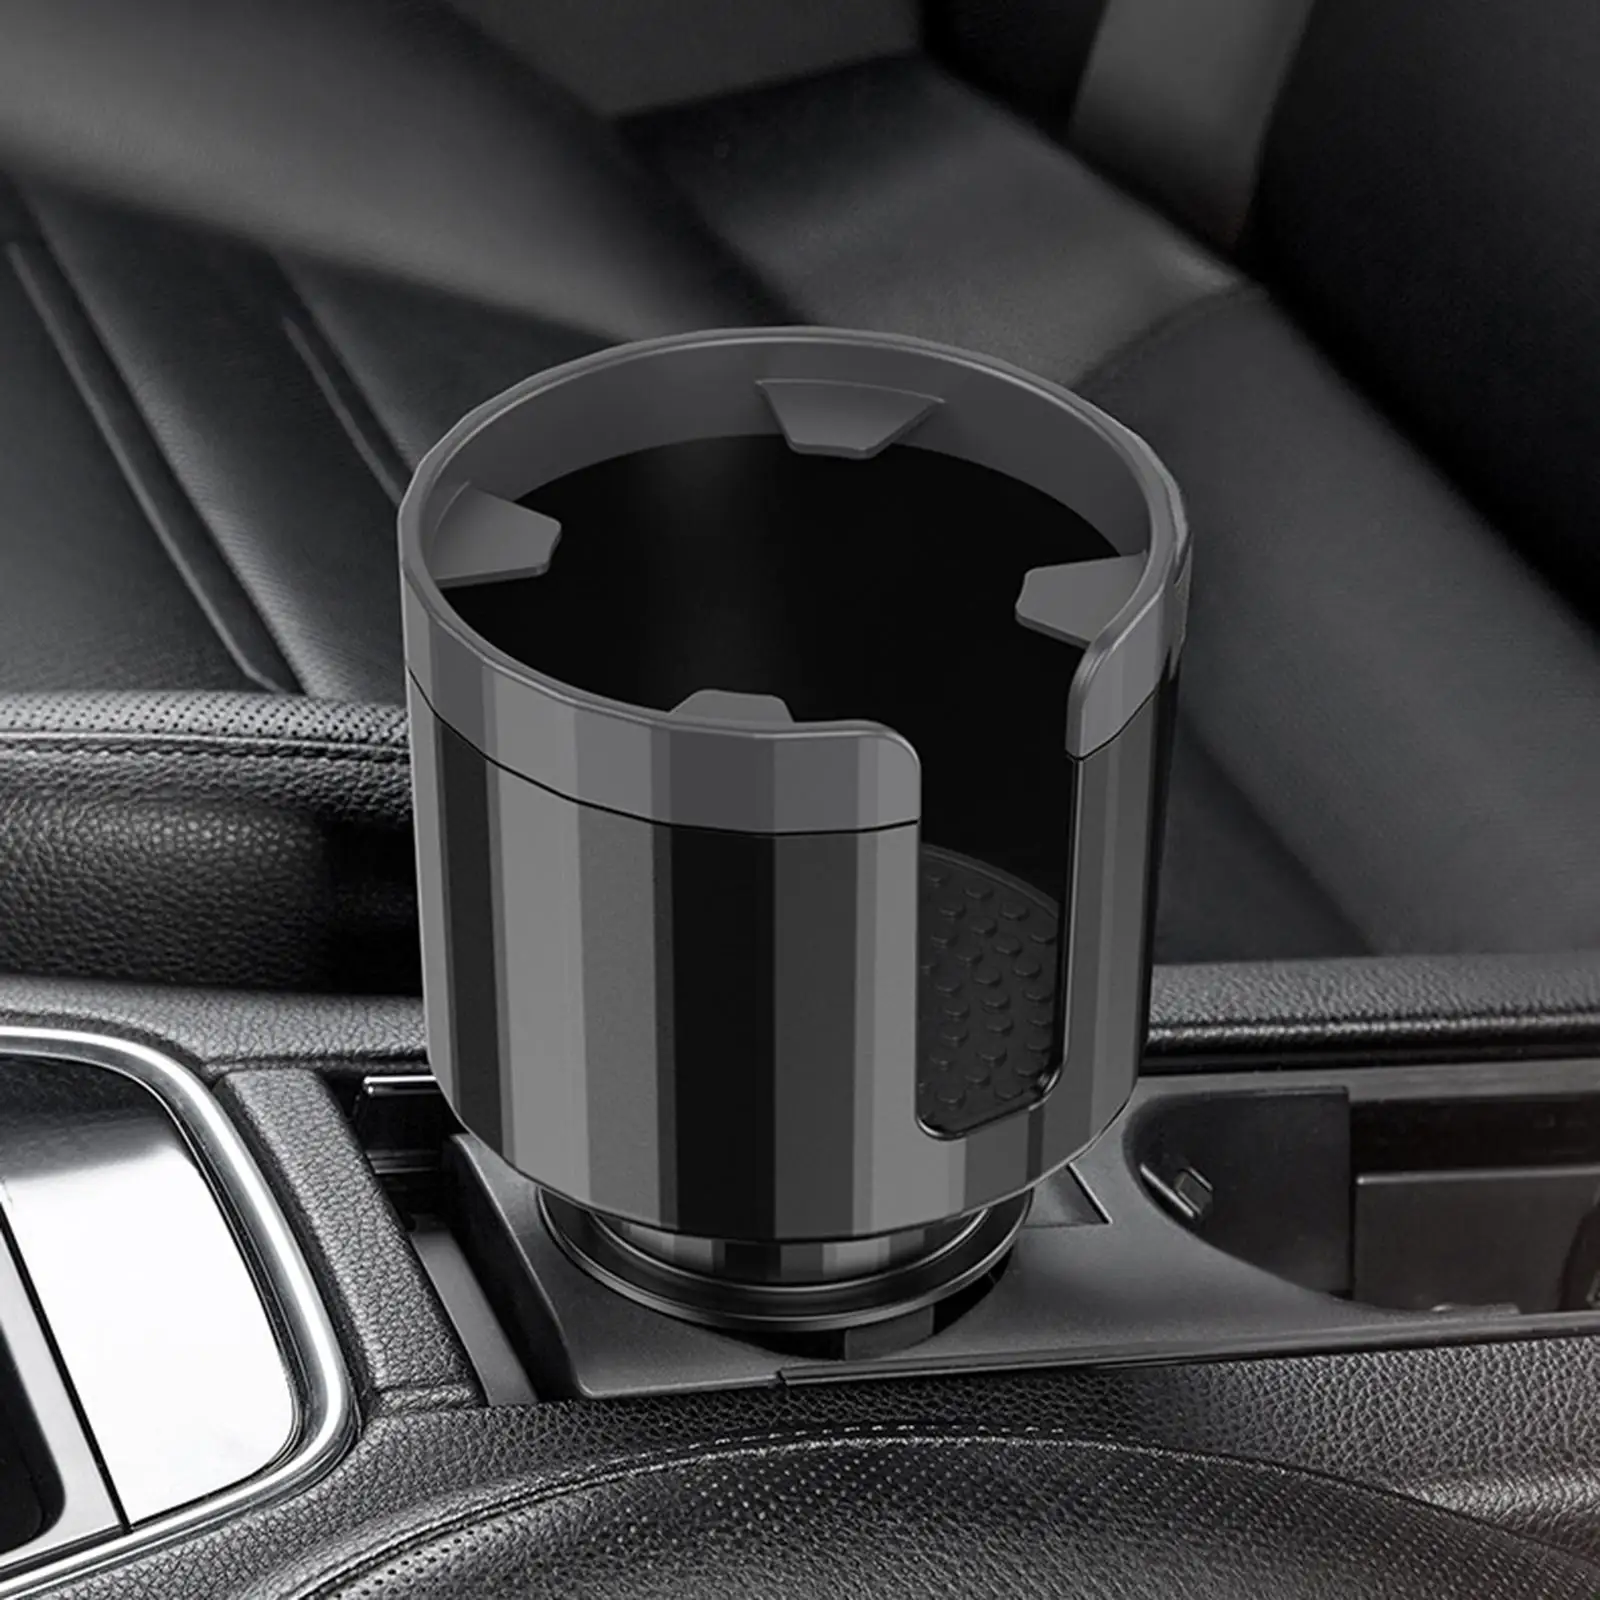 Car Cup Holder Expander Adapter Organizer for Most Cup Holder with Adjustable Base for Cups Accessories Easy to Install